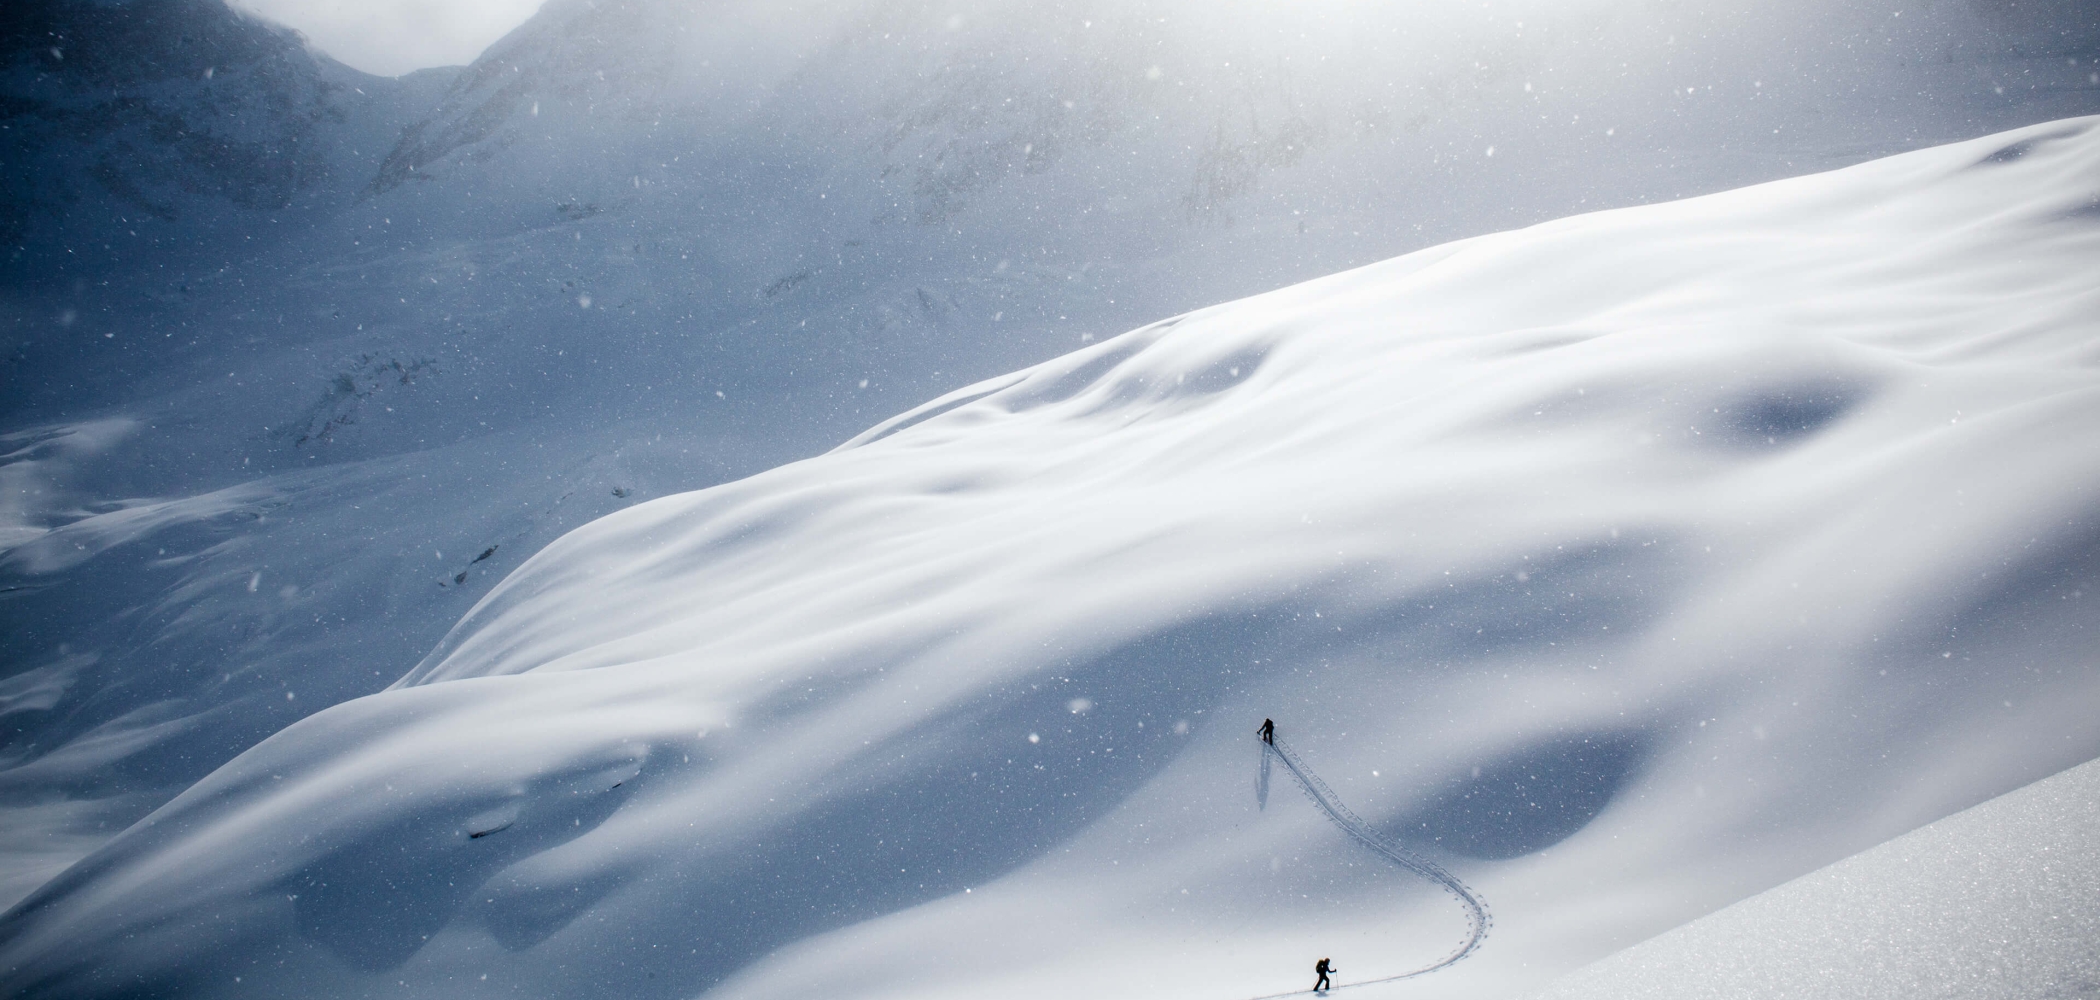 A person hikes up a steep snowy ski slope in the alpine. It is snowing heavily.